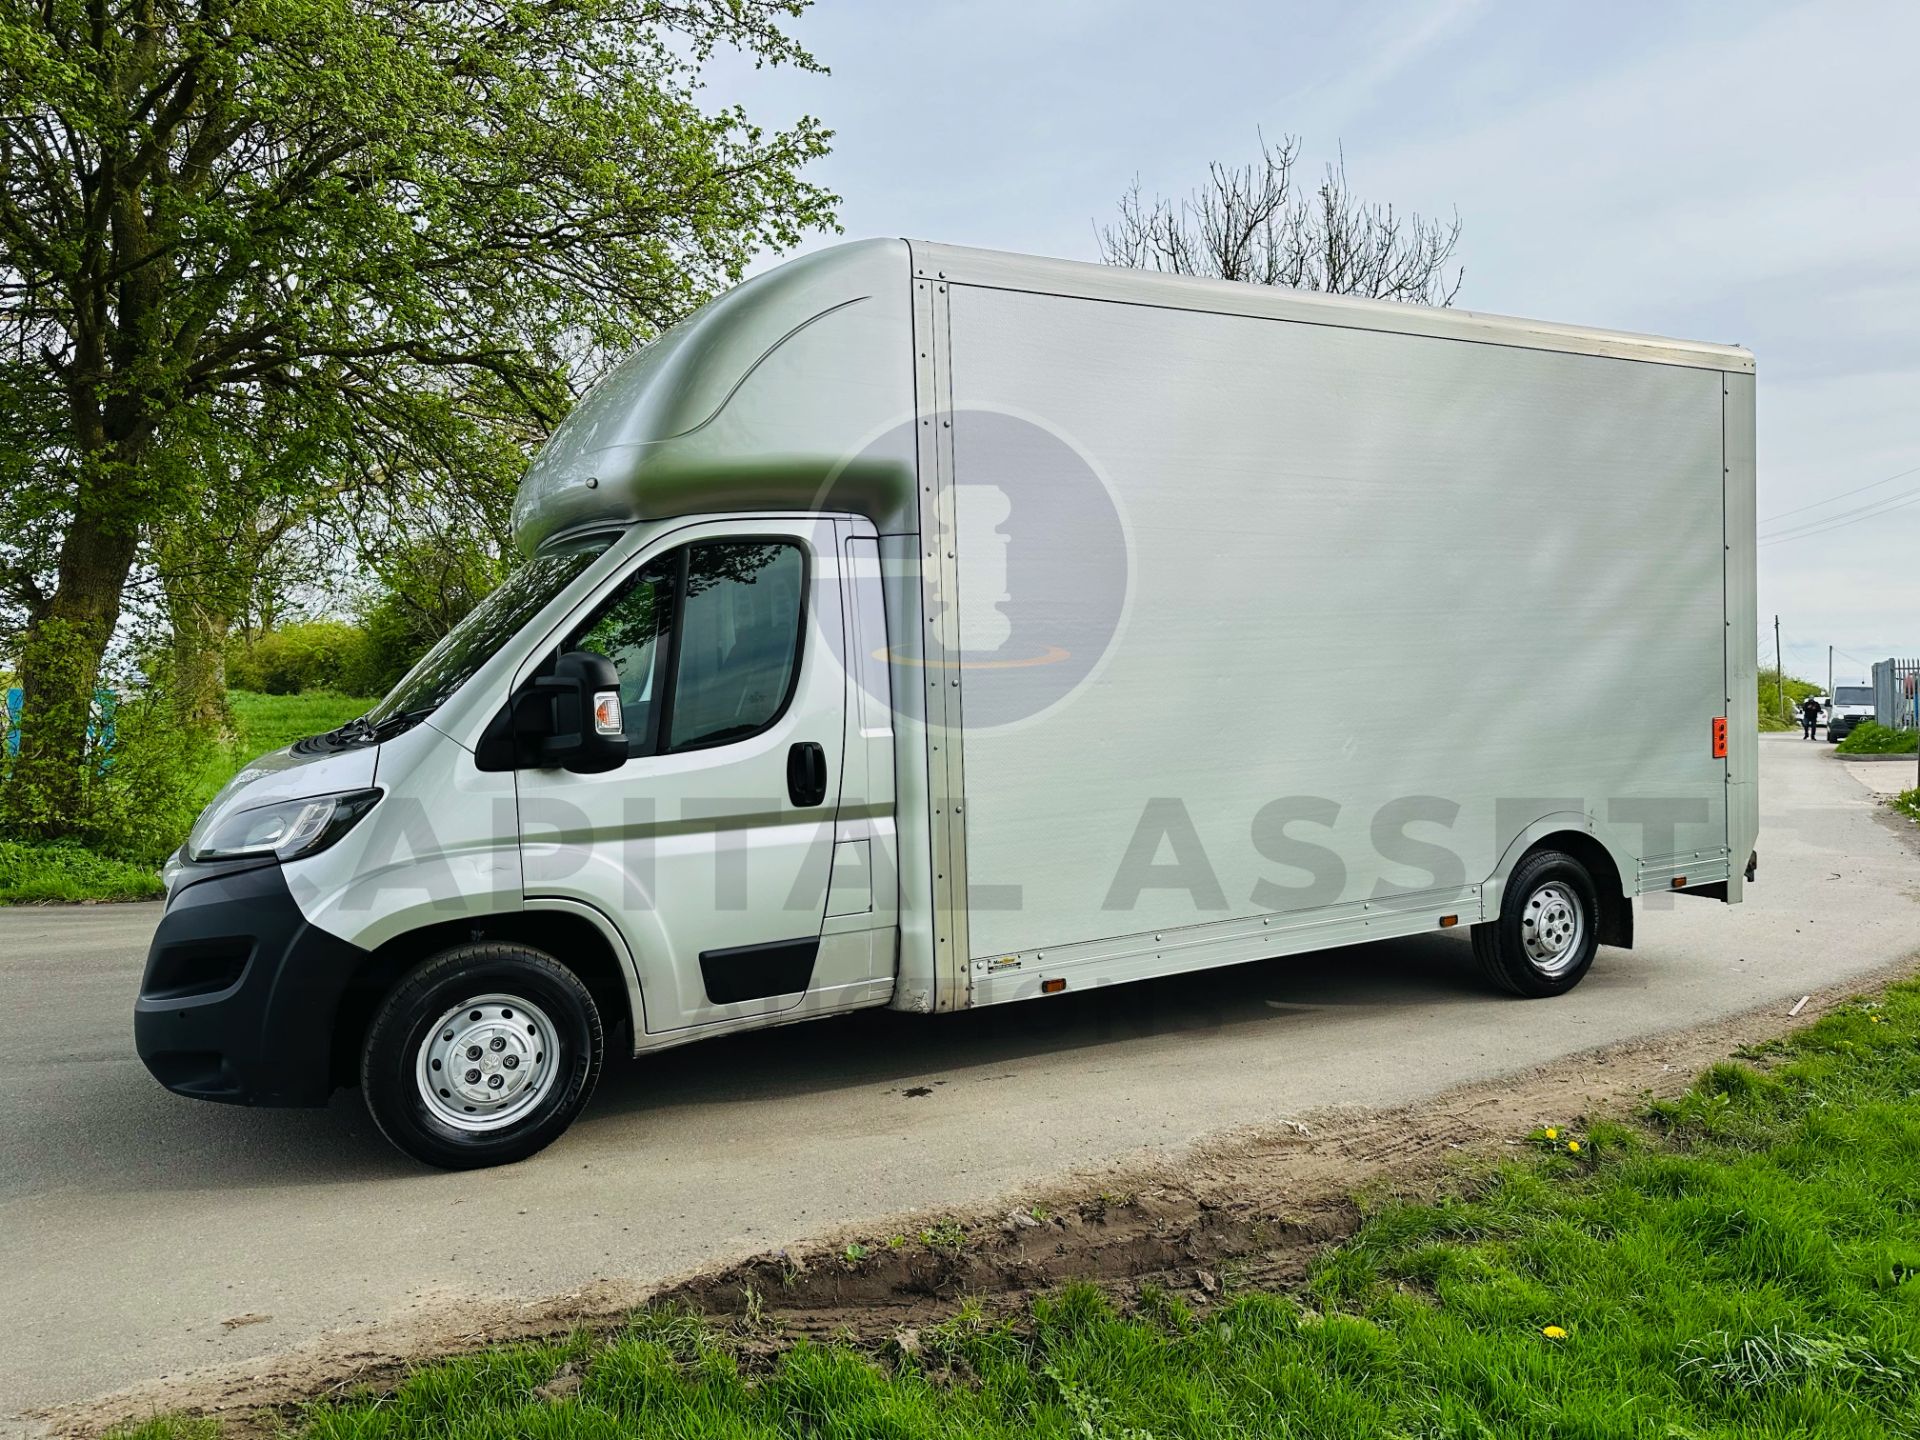 (ON SALE) PEUGEOT BOXER 335 *LWB LOW LOADER / MAXI MOVER LUTON* (2019 - EURO 6) 2.0 BLUE HDI *A/C* - Image 5 of 27